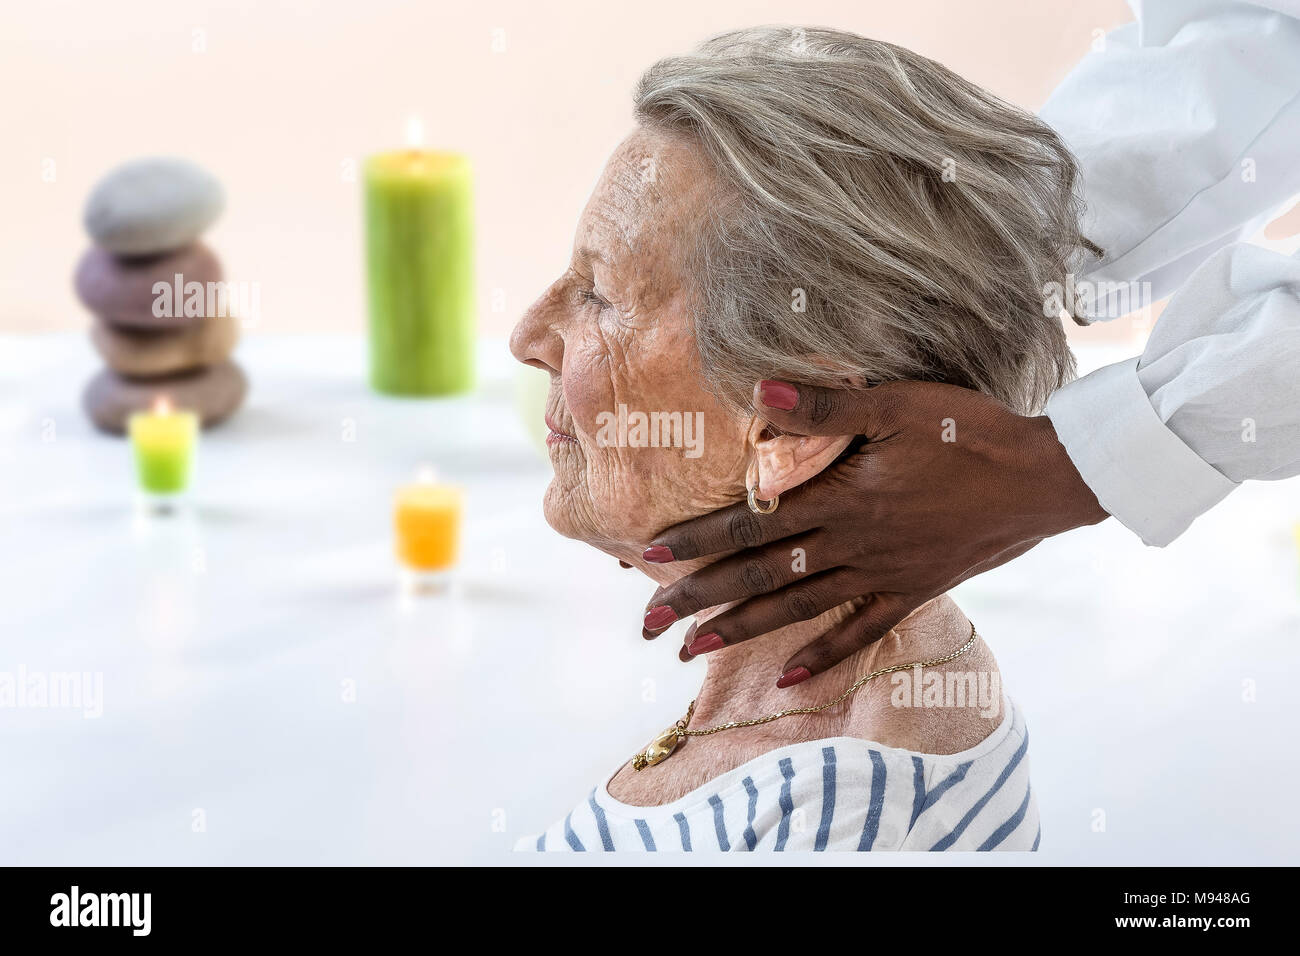 people, beauty, spa, healthy lifestyle and relaxation concept - close up of old woman sitting proile view with closed eyes and having massage in spa Stock Photo